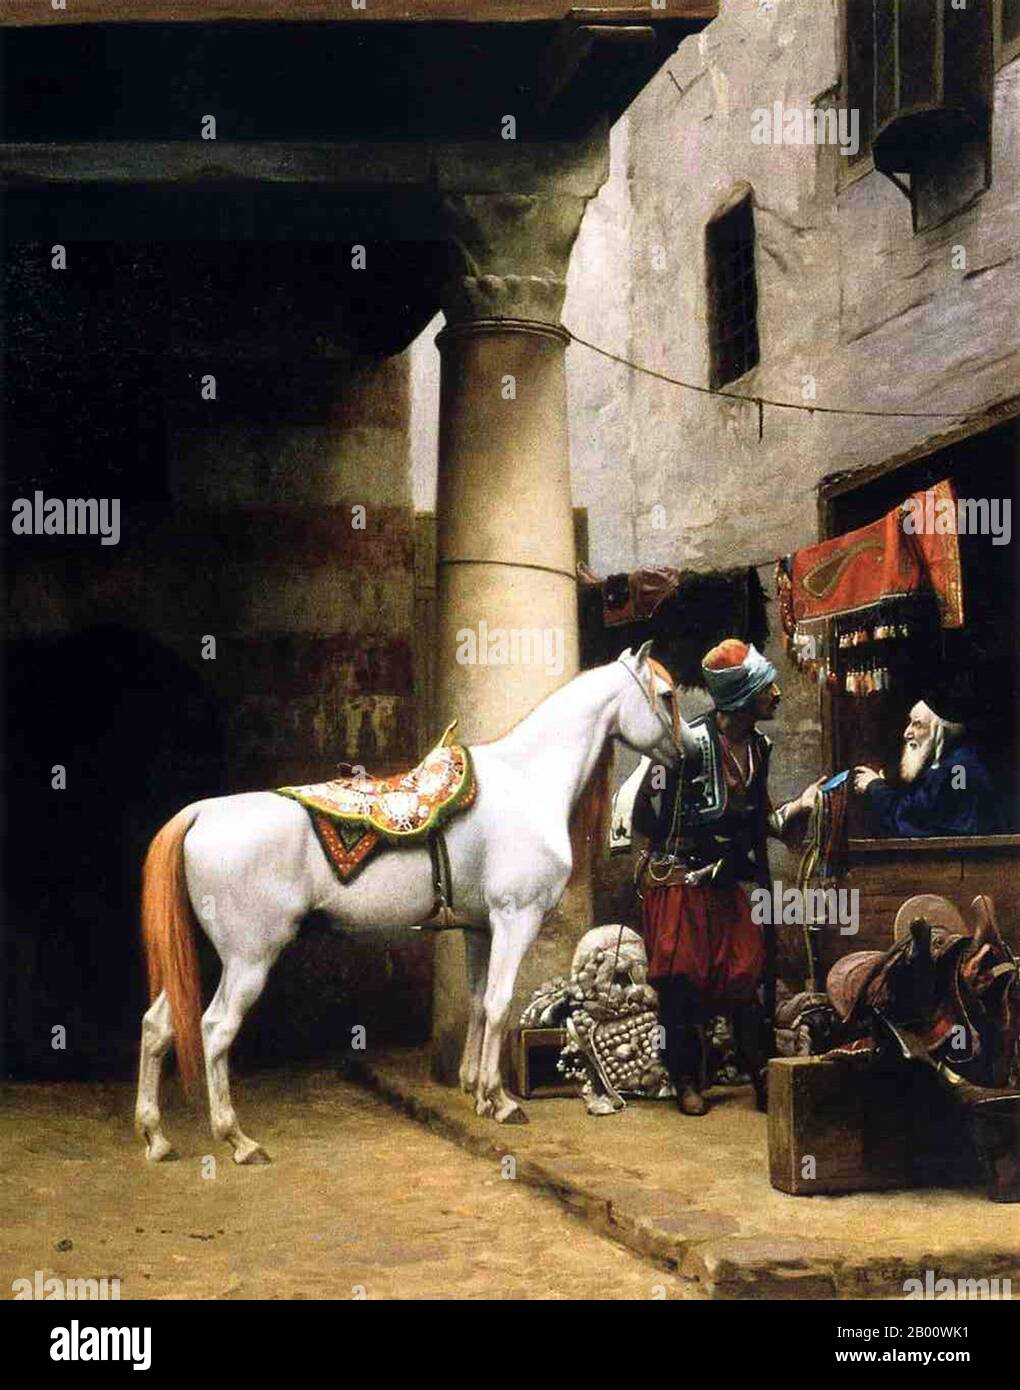 Egypt: 'The Saddle Bazaar, Cairo'. Oil on canvas painting by Jean-Leon Gerome (1824-1904), 1883.  Jean-Léon Gérôme (11 May 1824 – 10 January 1904) was a French painter and sculptor in the style now known as Academicism. The range of his oeuvre included historical painting, Greek mythology, Orientalism, portraits and other subjects, bringing the Academic painting tradition to an artistic climax. Stock Photo